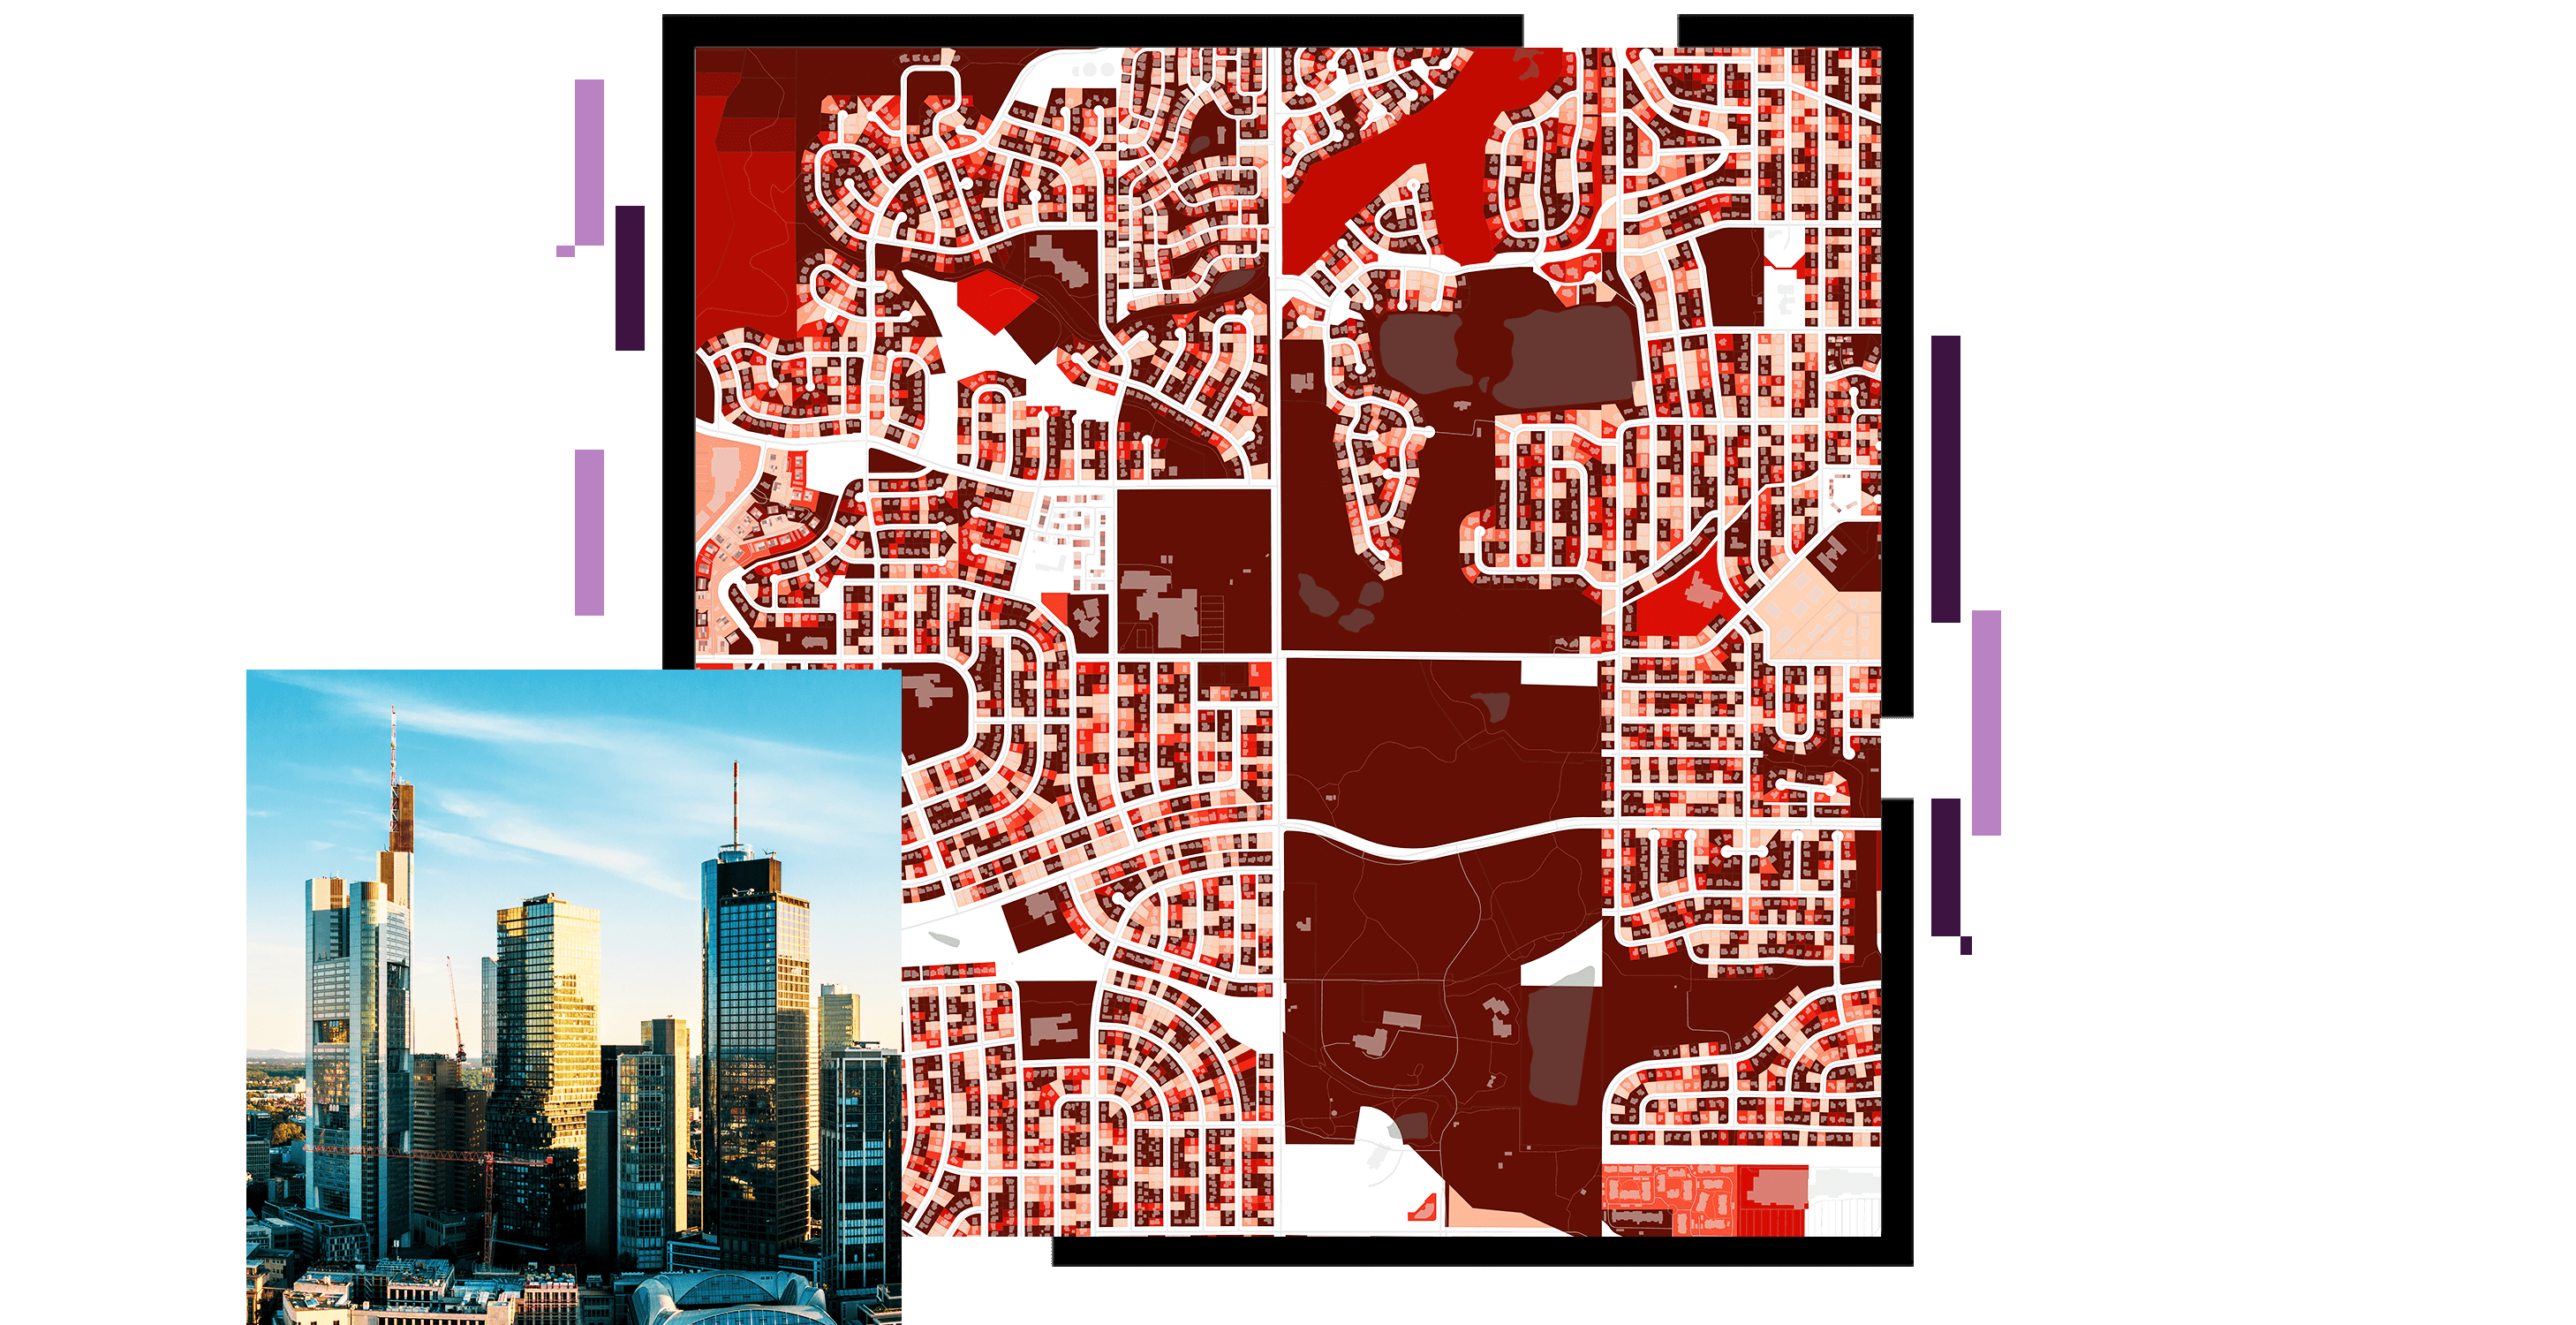 A city map in dark red and white, beside a small photo of a city skyline with skyscrapers mirroring a sunrise under a bright blue sky  